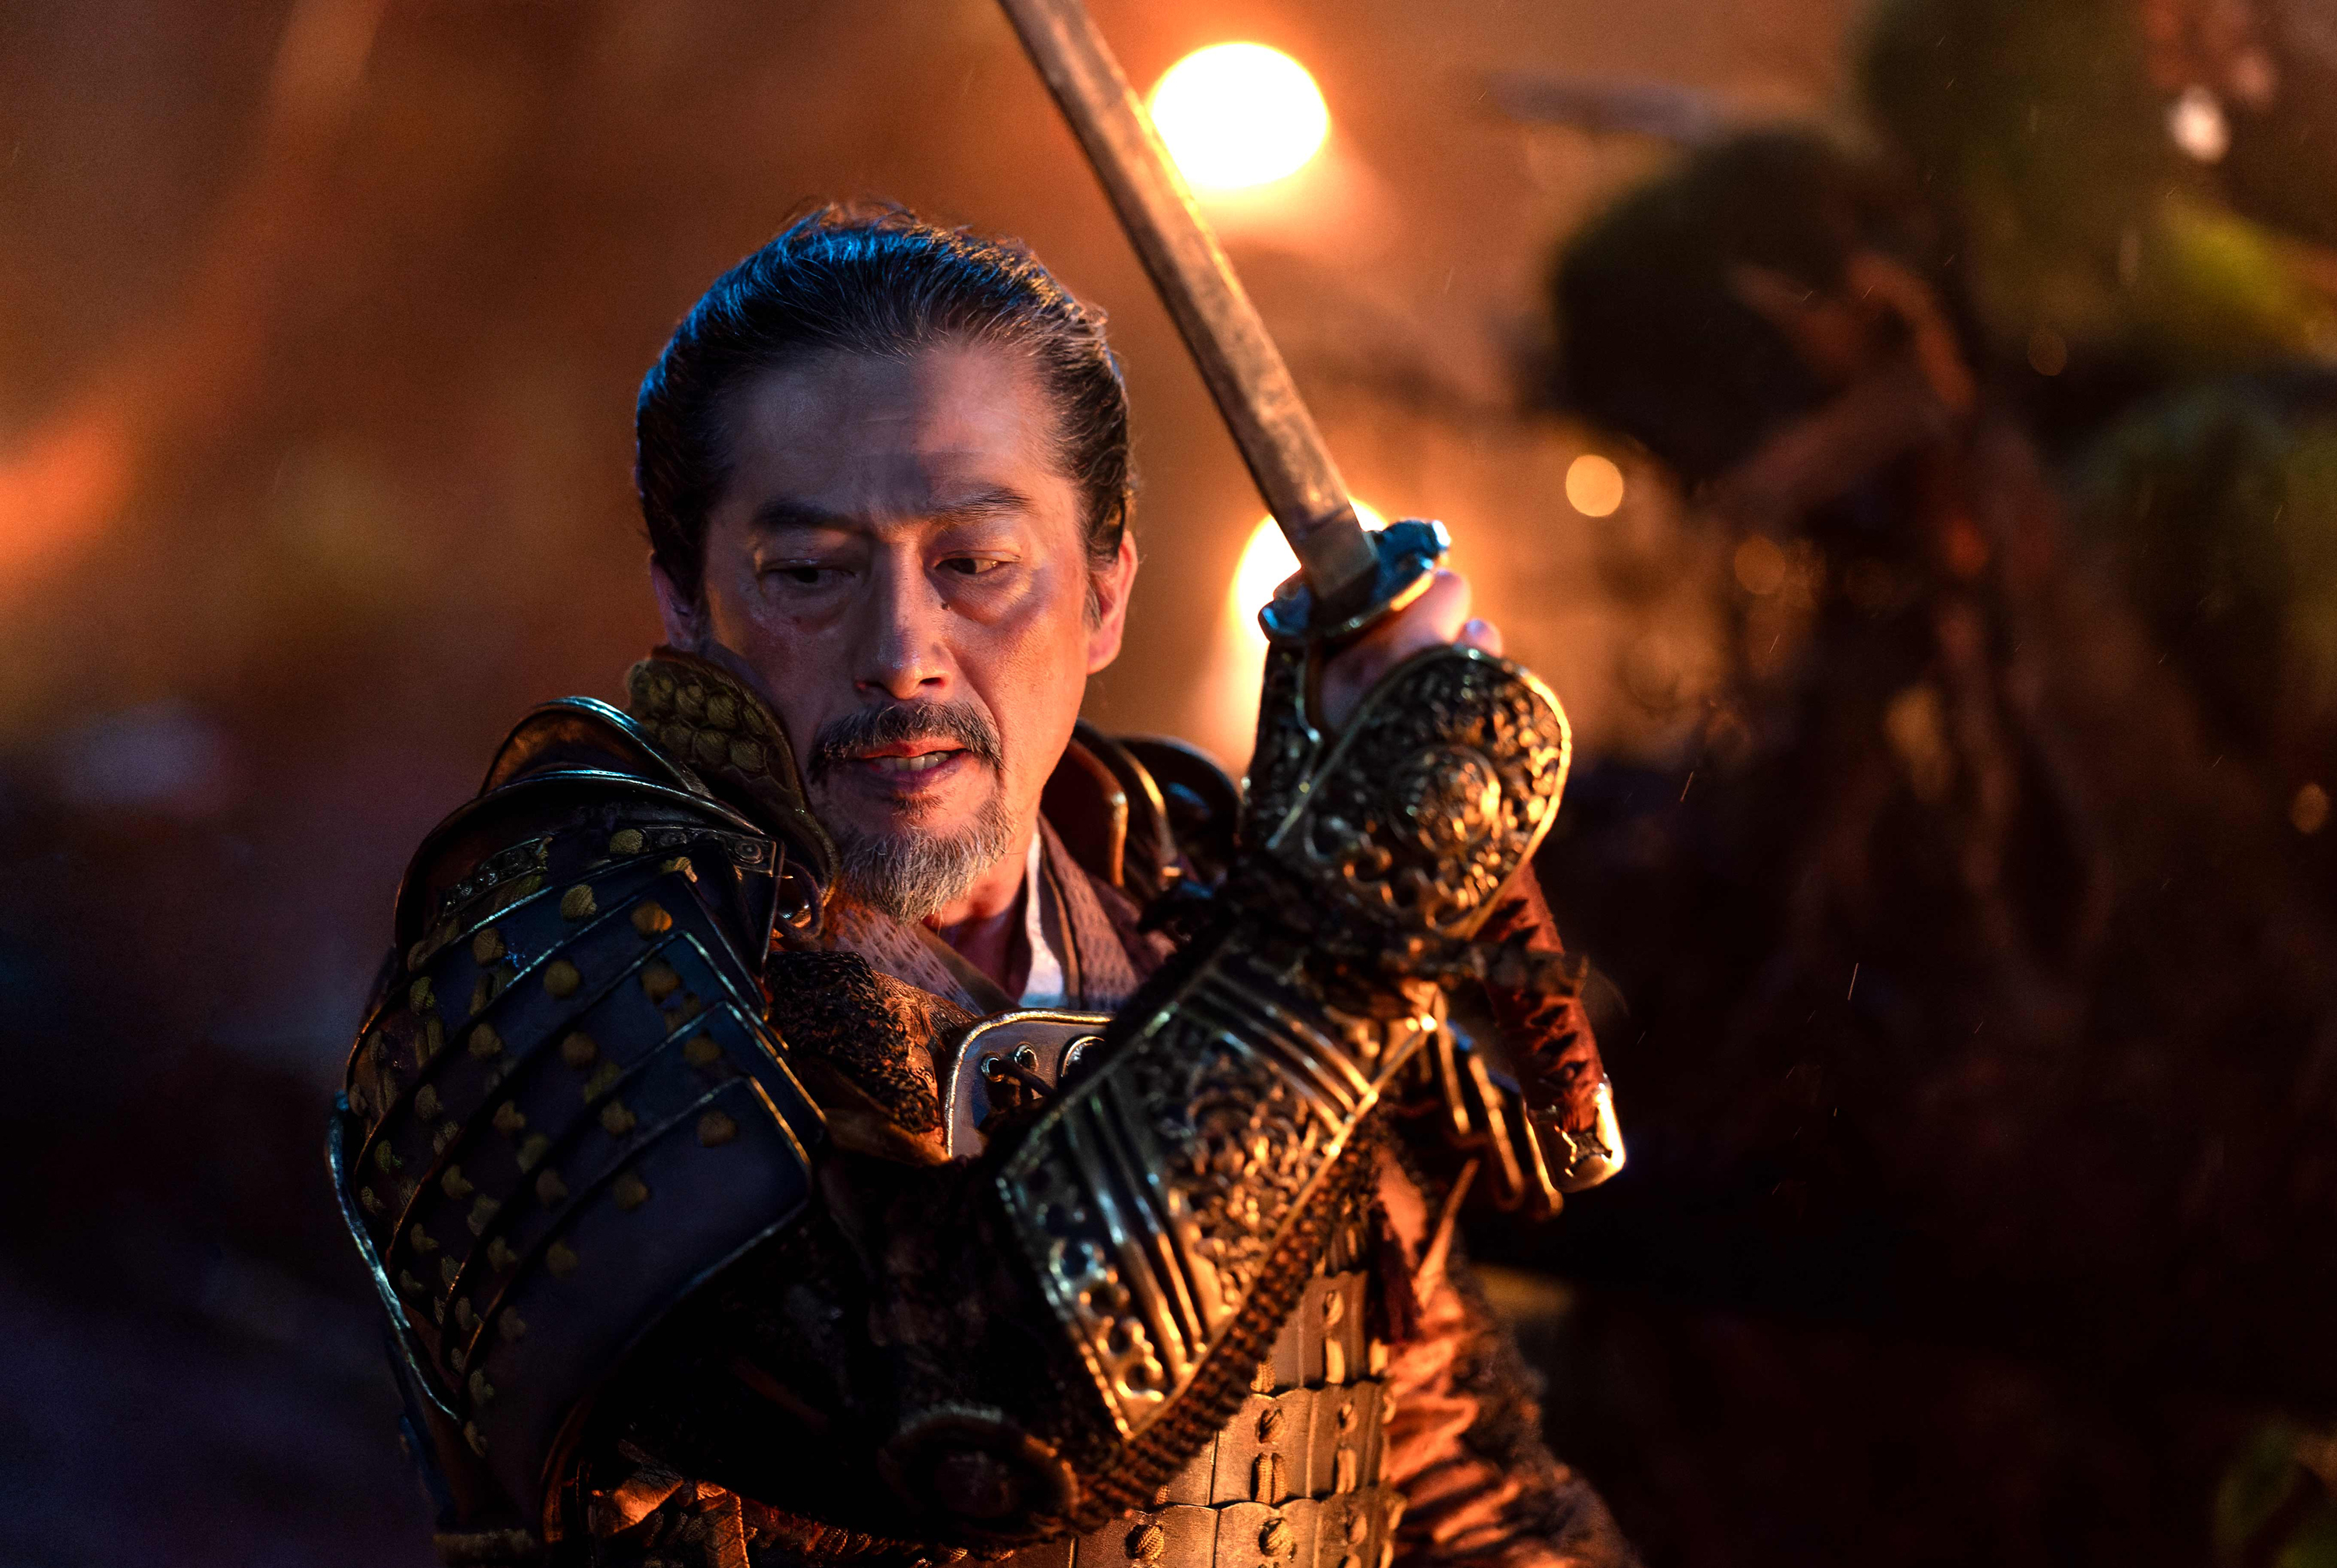 Shōgun episode 3 sets up its most important character by keeping him out of the limelight